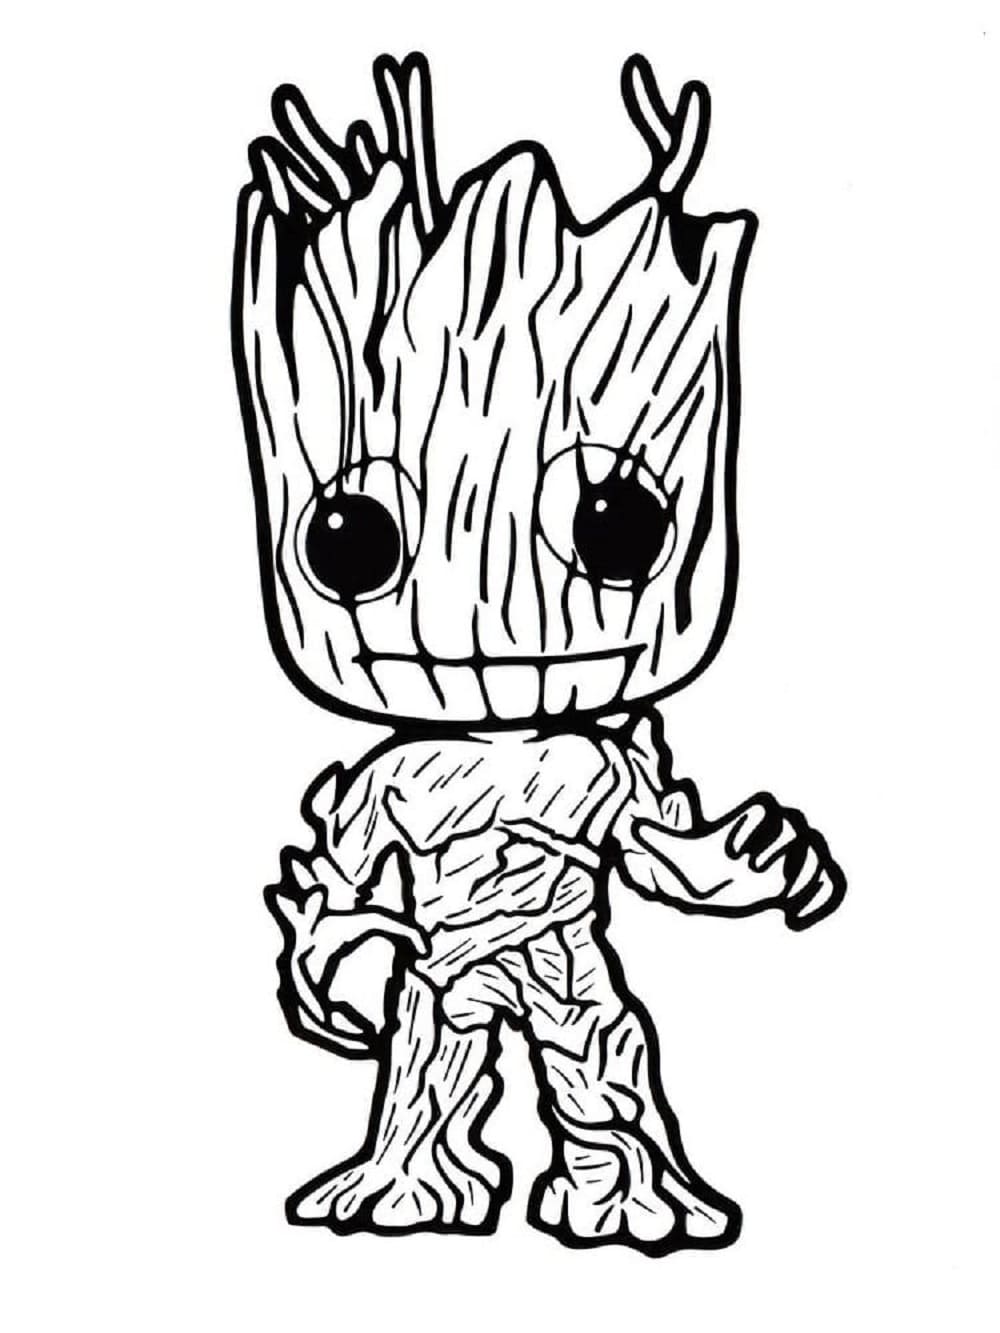 Printable Funko Pop Groot Coloring Page